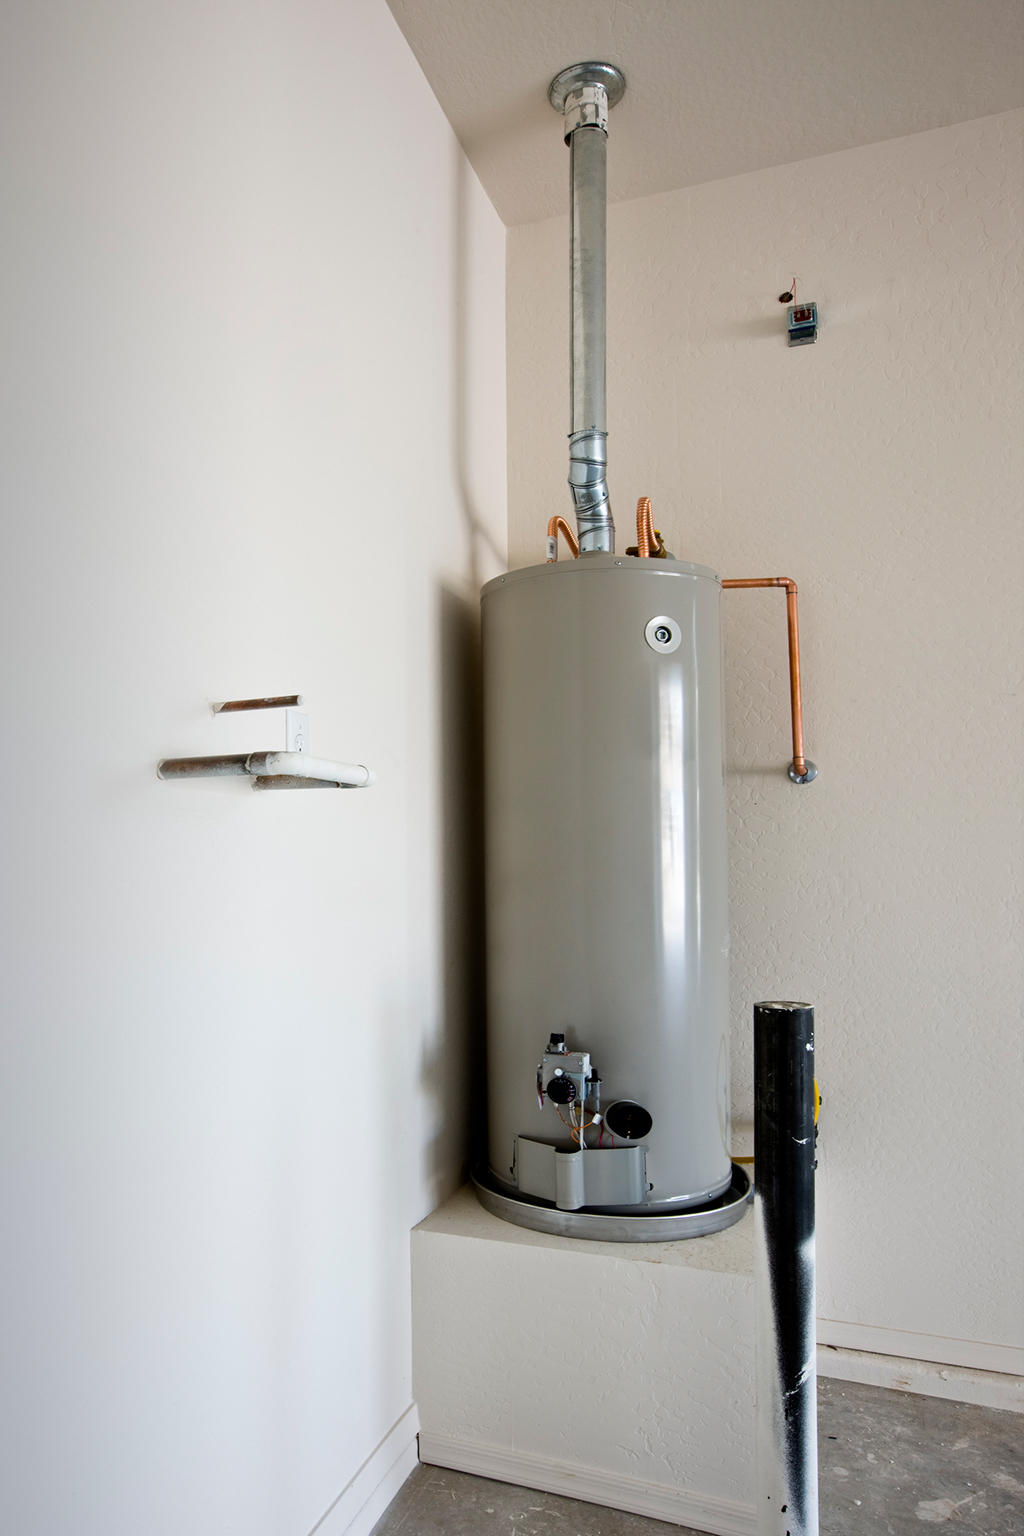 Do You Need A Water Heater Repair? | Boerne, TX